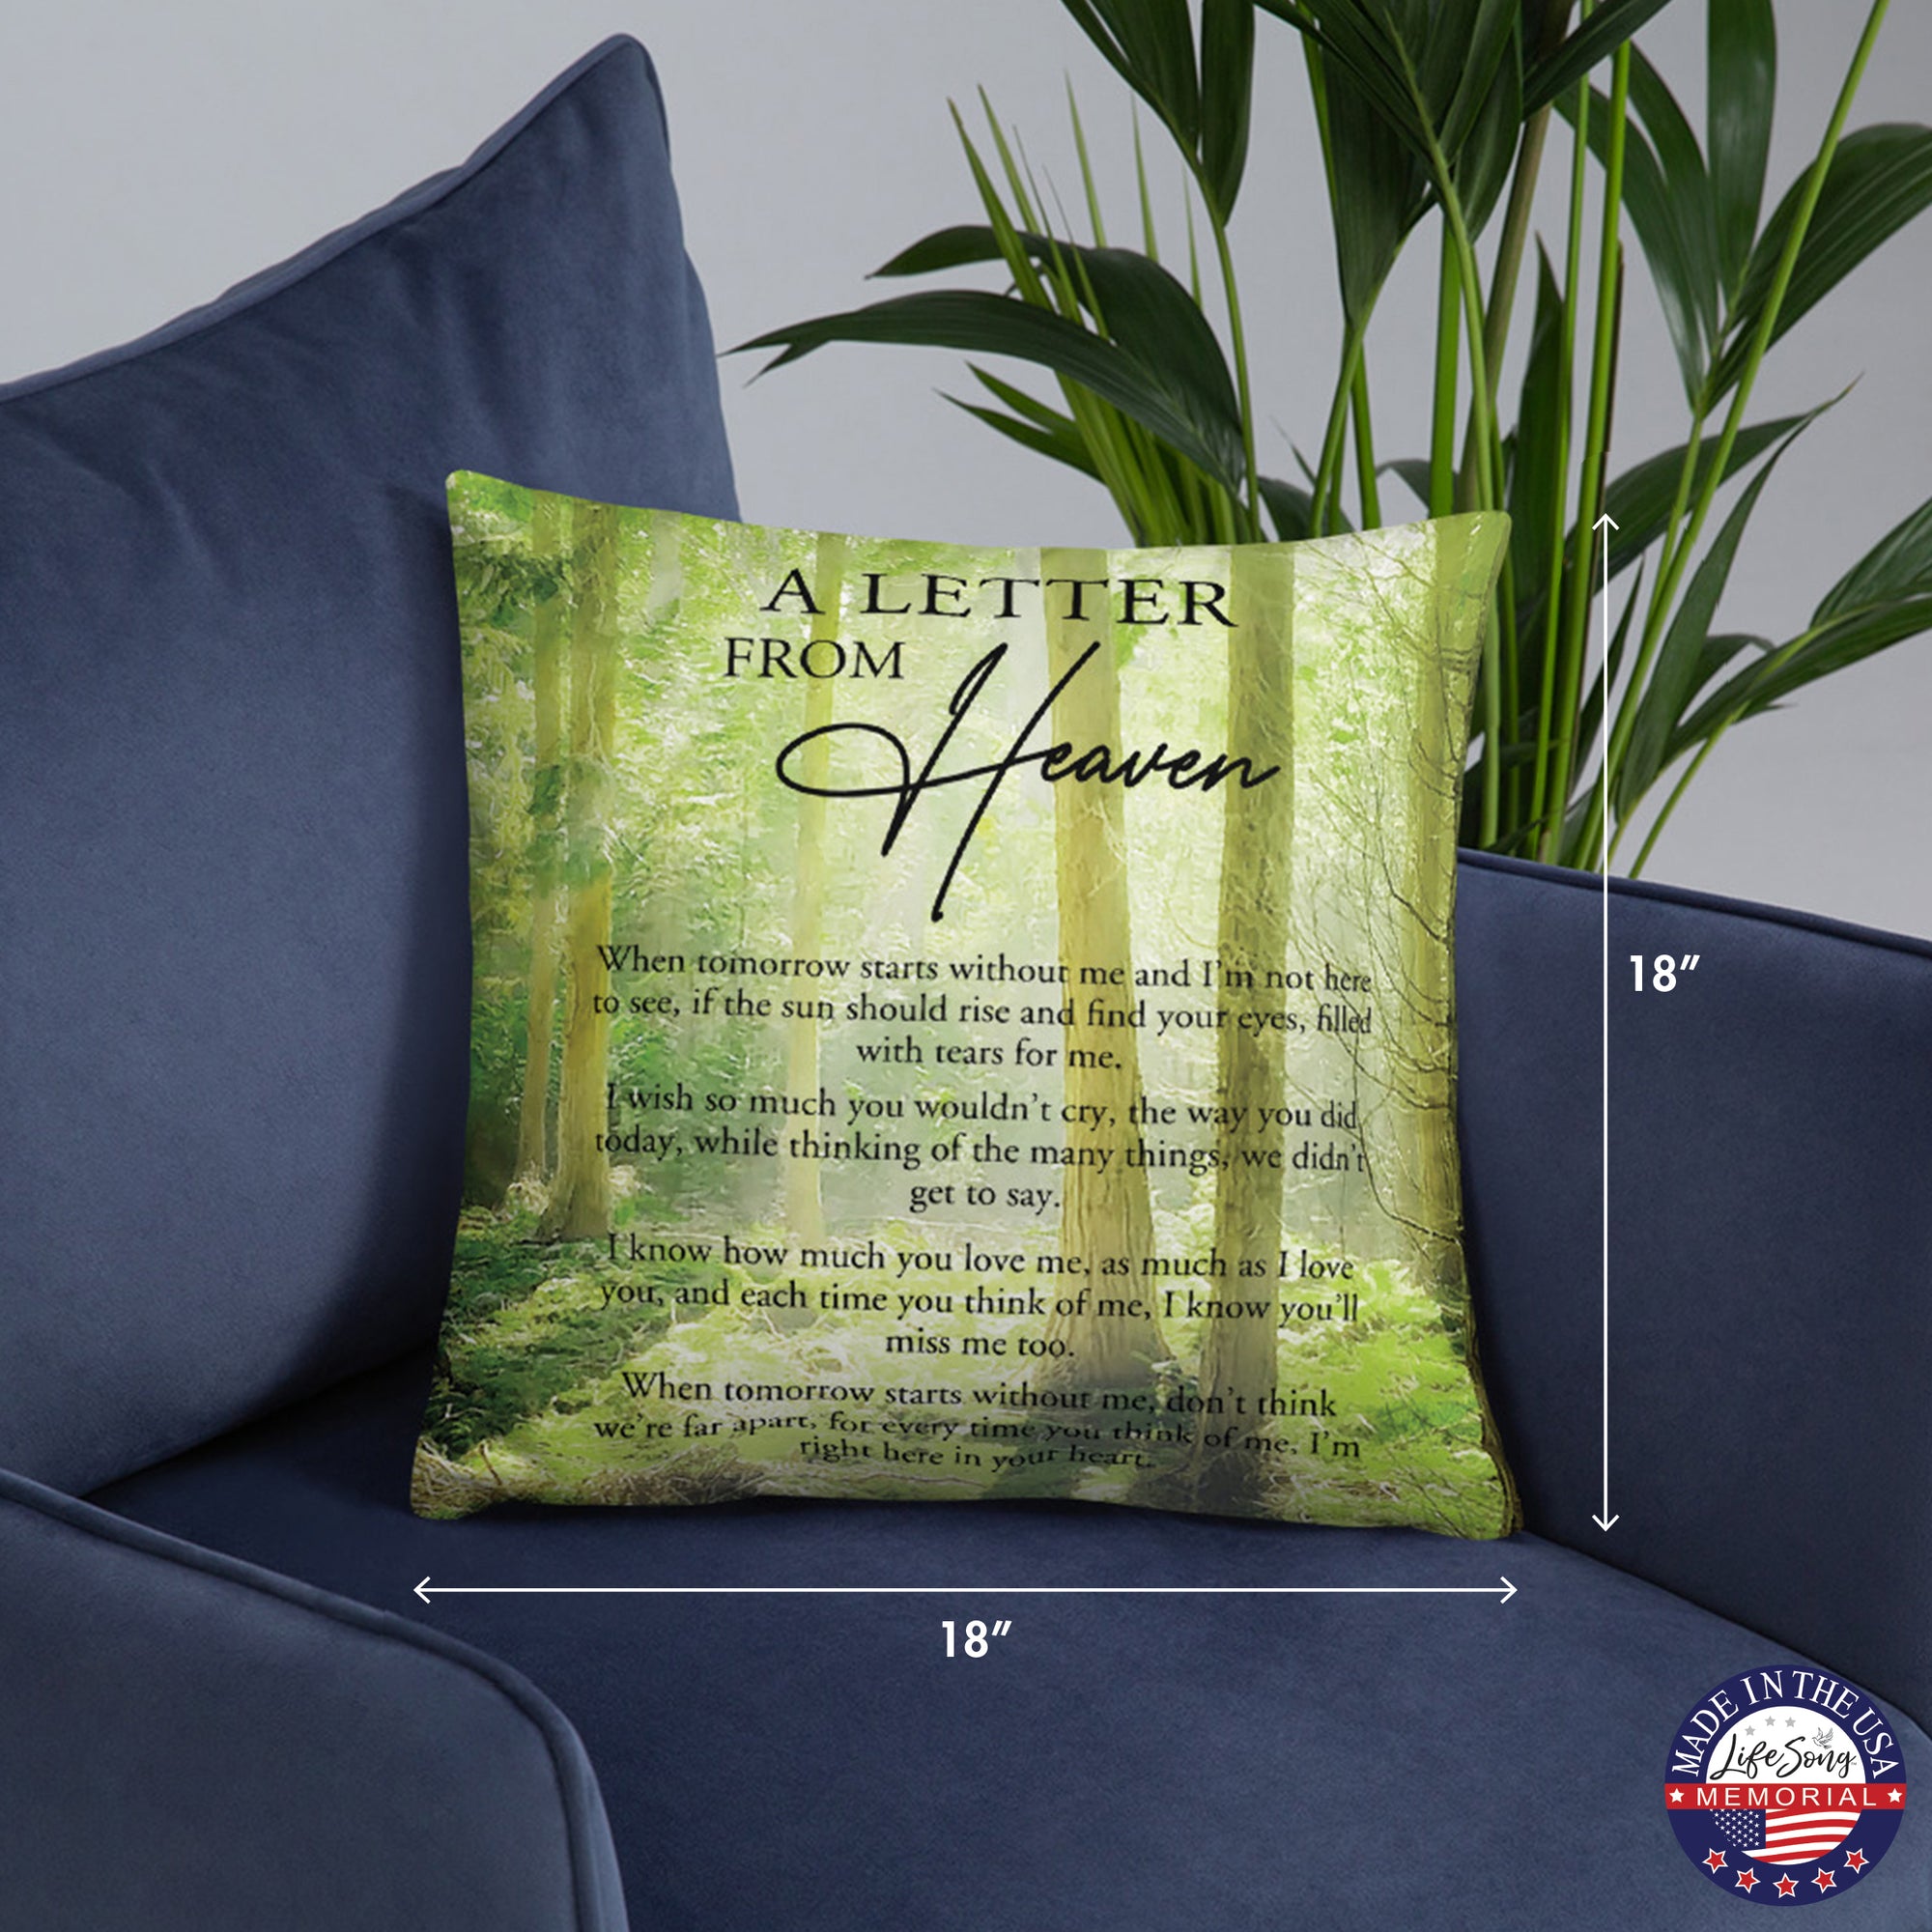 A memorial throw pillow with a serene design in soft colors, a comforting choice for home décor or as a memorial bereavement gift.